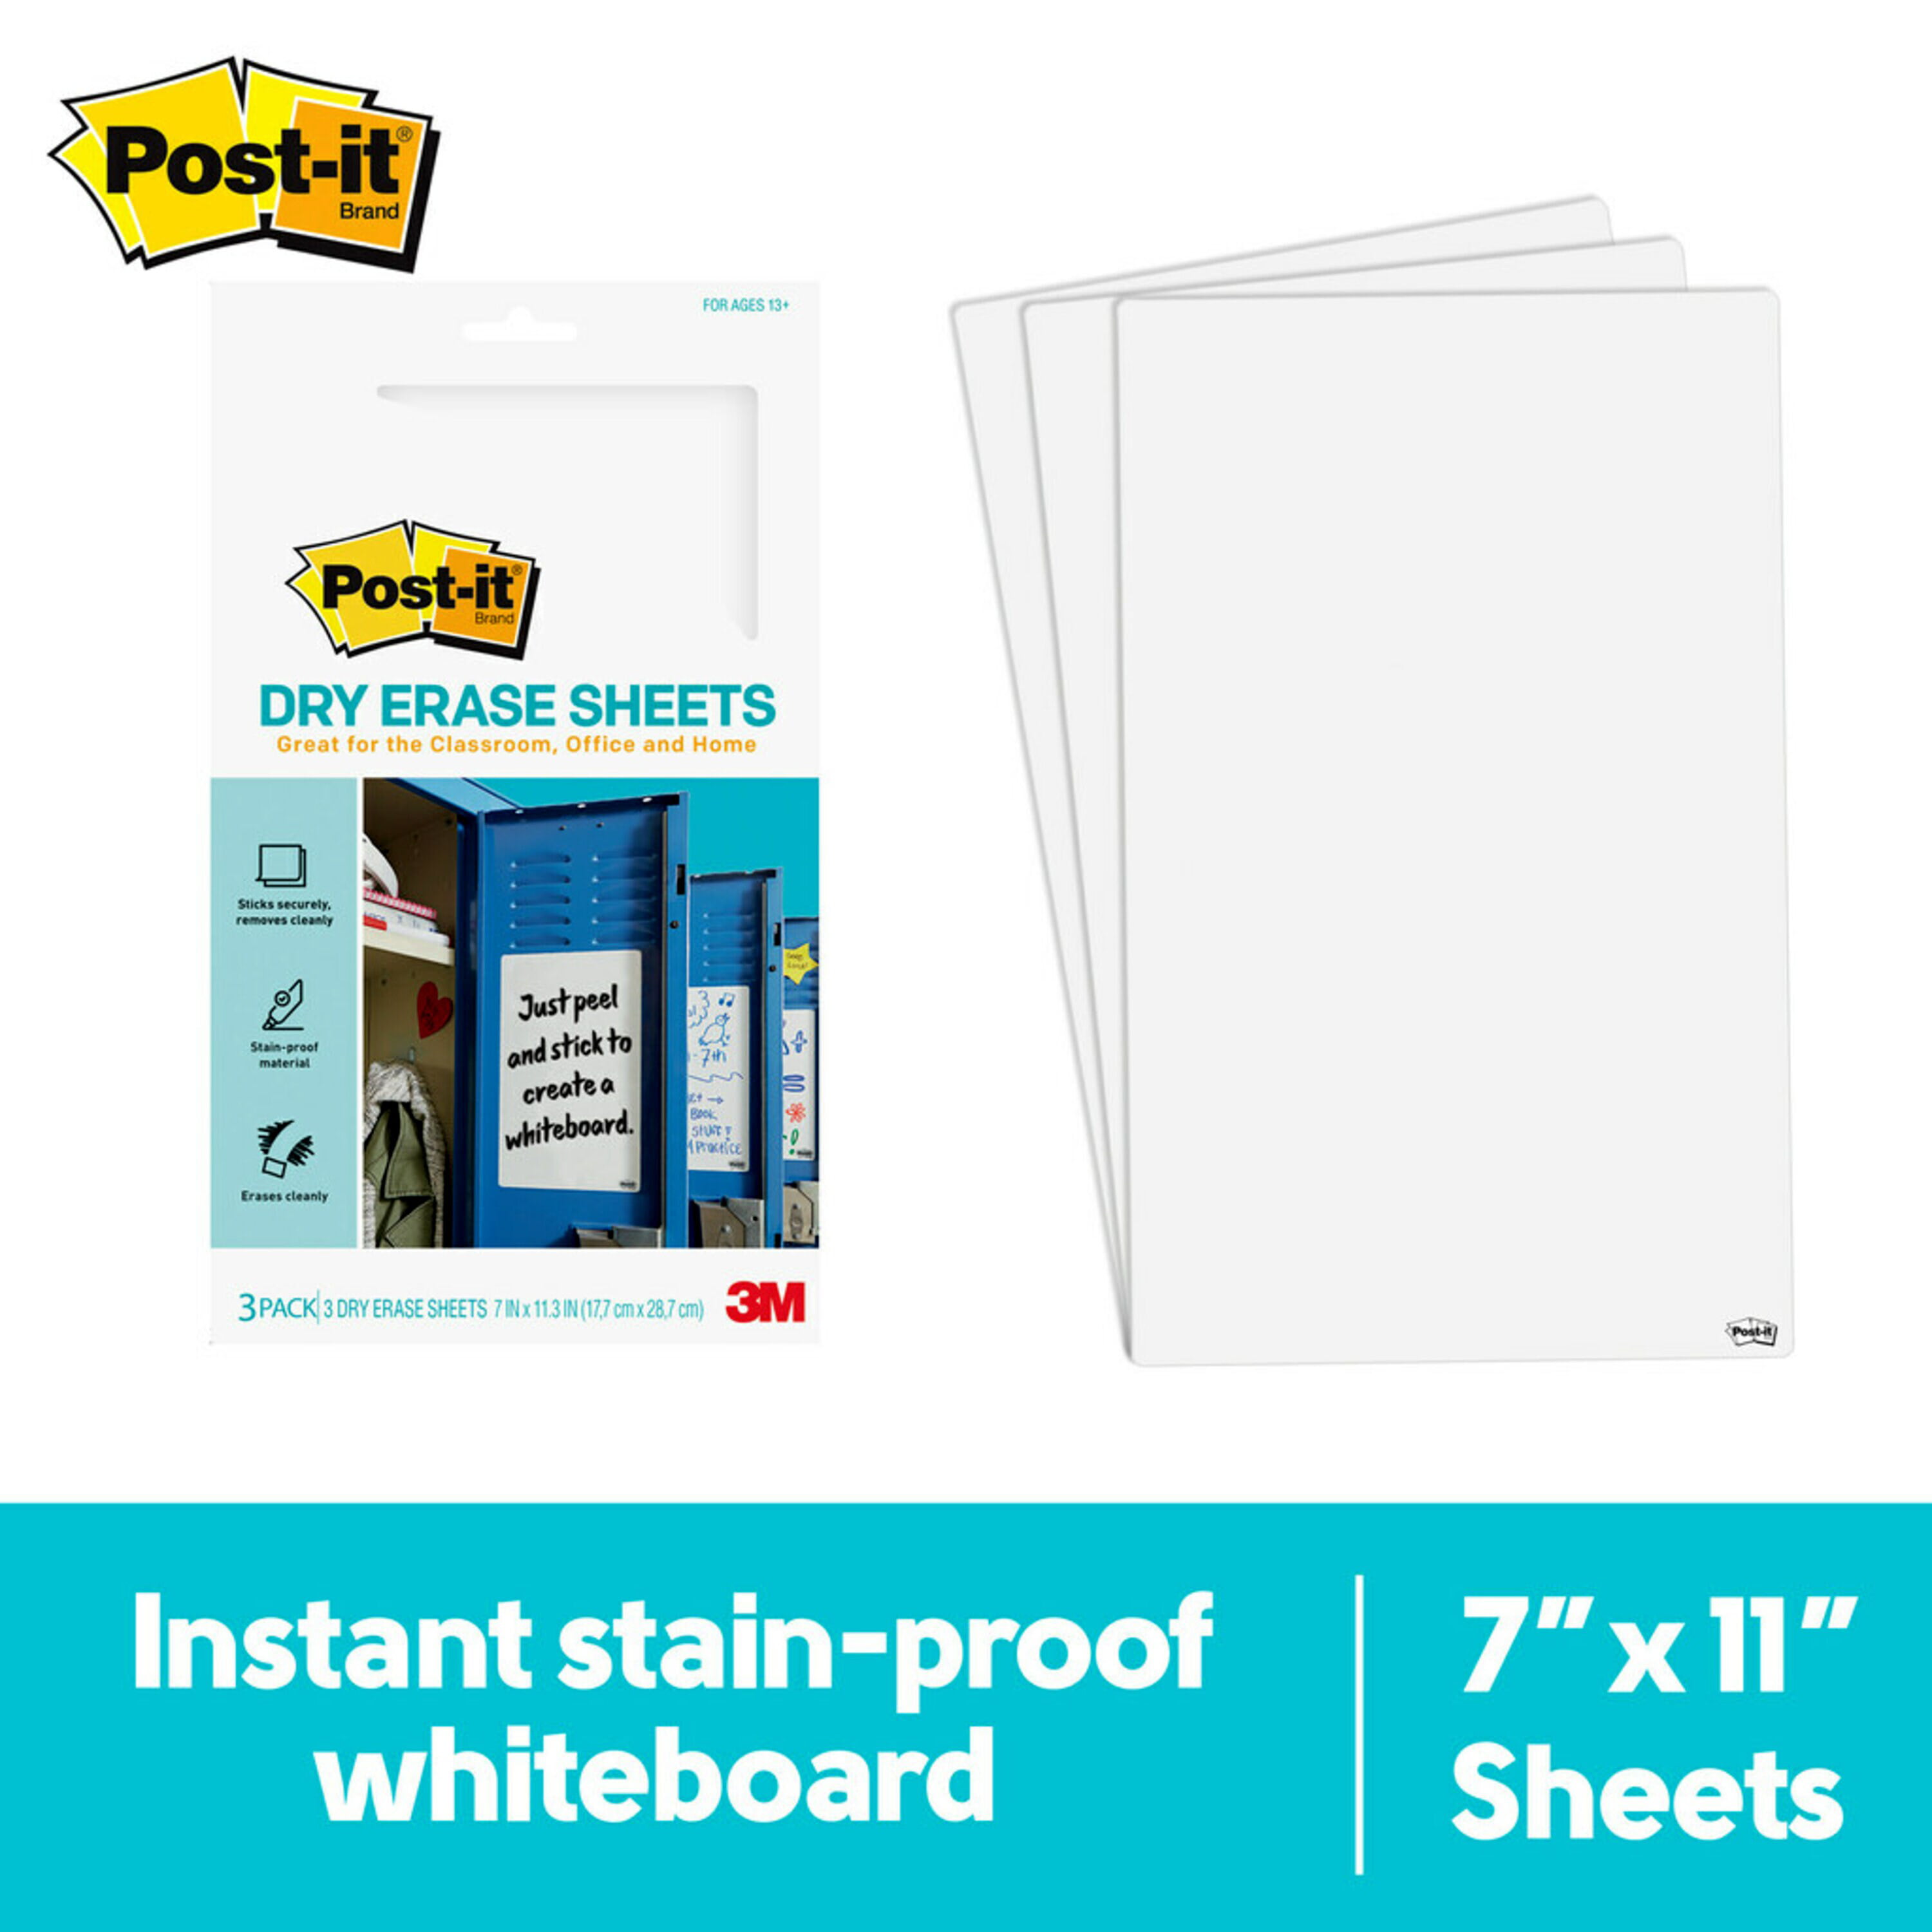 Post-it Super Sticky Dry Erase Sheets, 7 in x 11.3 in, 3 Sheets Total